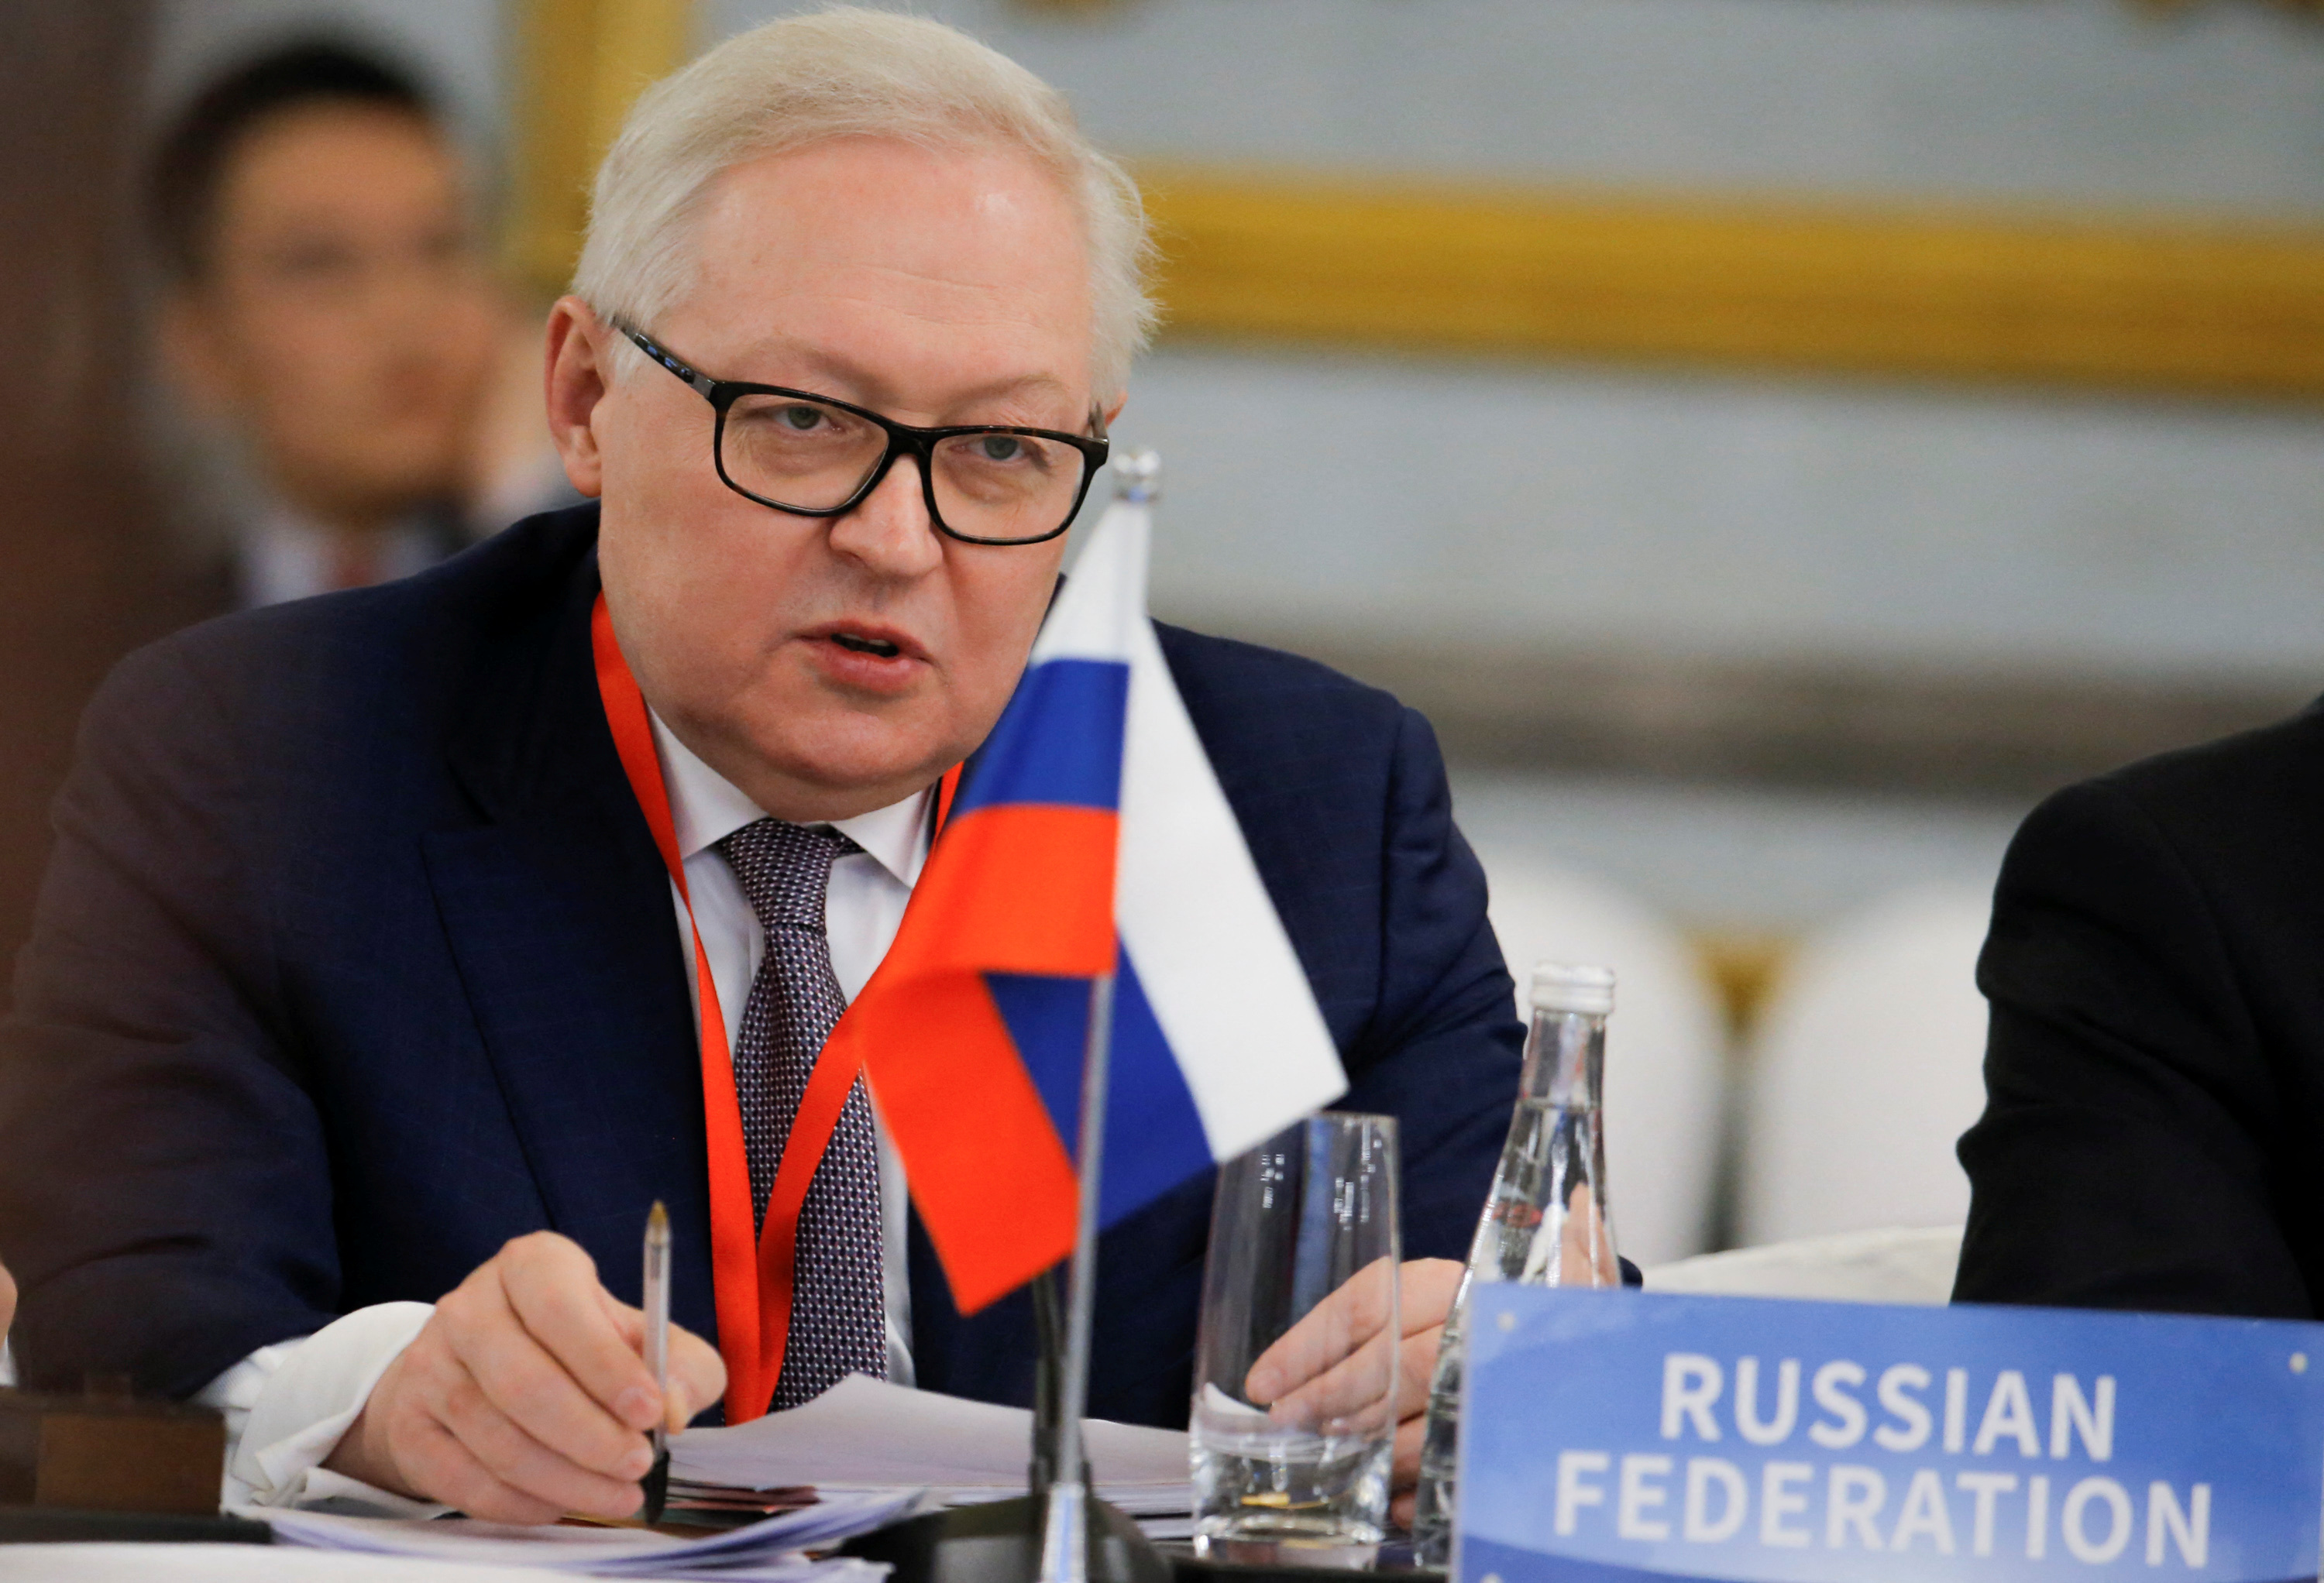 Russian Deputy Foreign Minister and head of delegation Sergey Ryabkov attend a Treaty on the Non-Proliferation of Nuclear Weapons (NPT) conference in Beijing of the UN Security Council's five permanent members (P5) China, France, Russia, the United Kingdom, and the United States, China, January 30, 2019.   REUTERS/Thomas Peter/Pool/Files